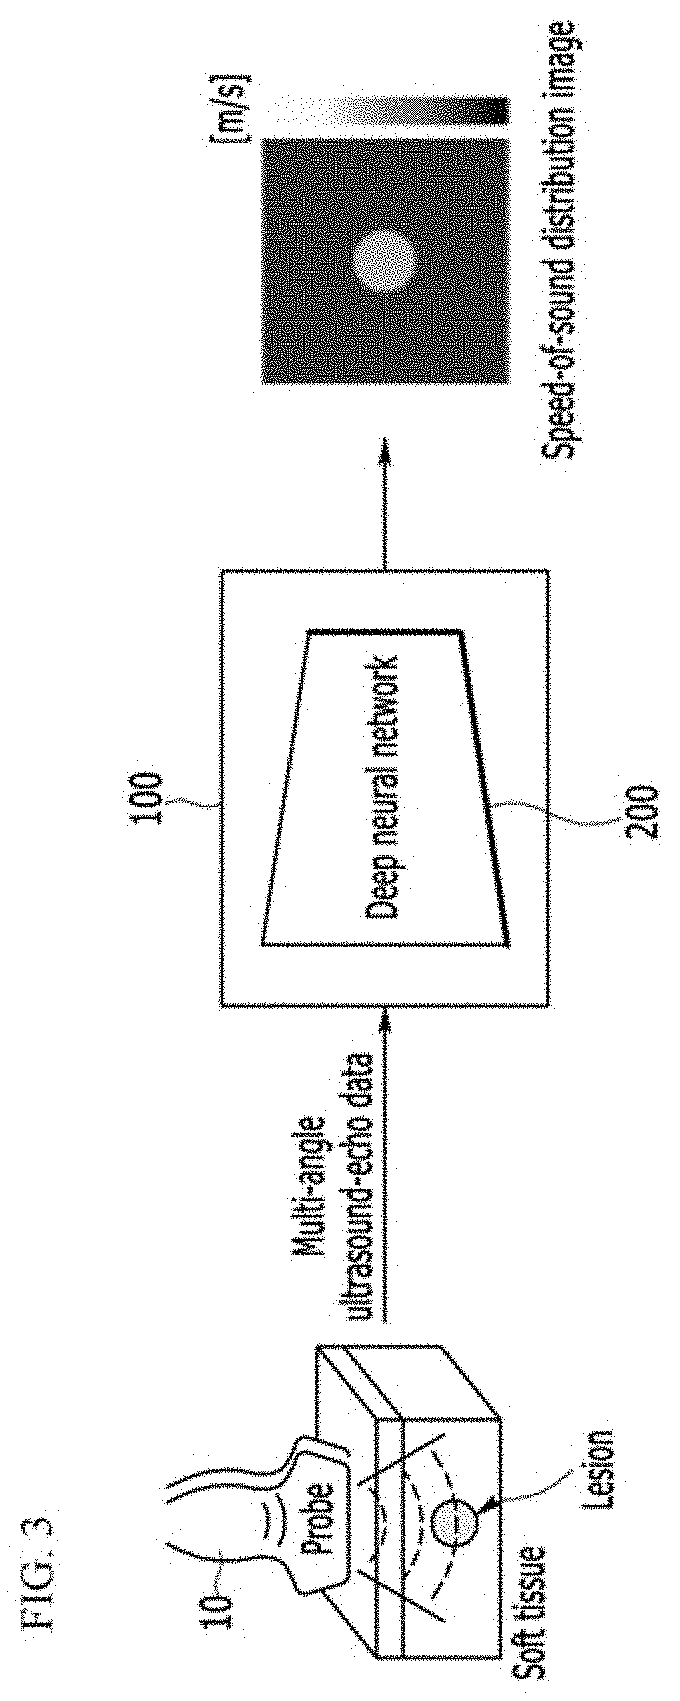 Method and apparatus for quantitative ultrasound imaging using single-ultrasound probe